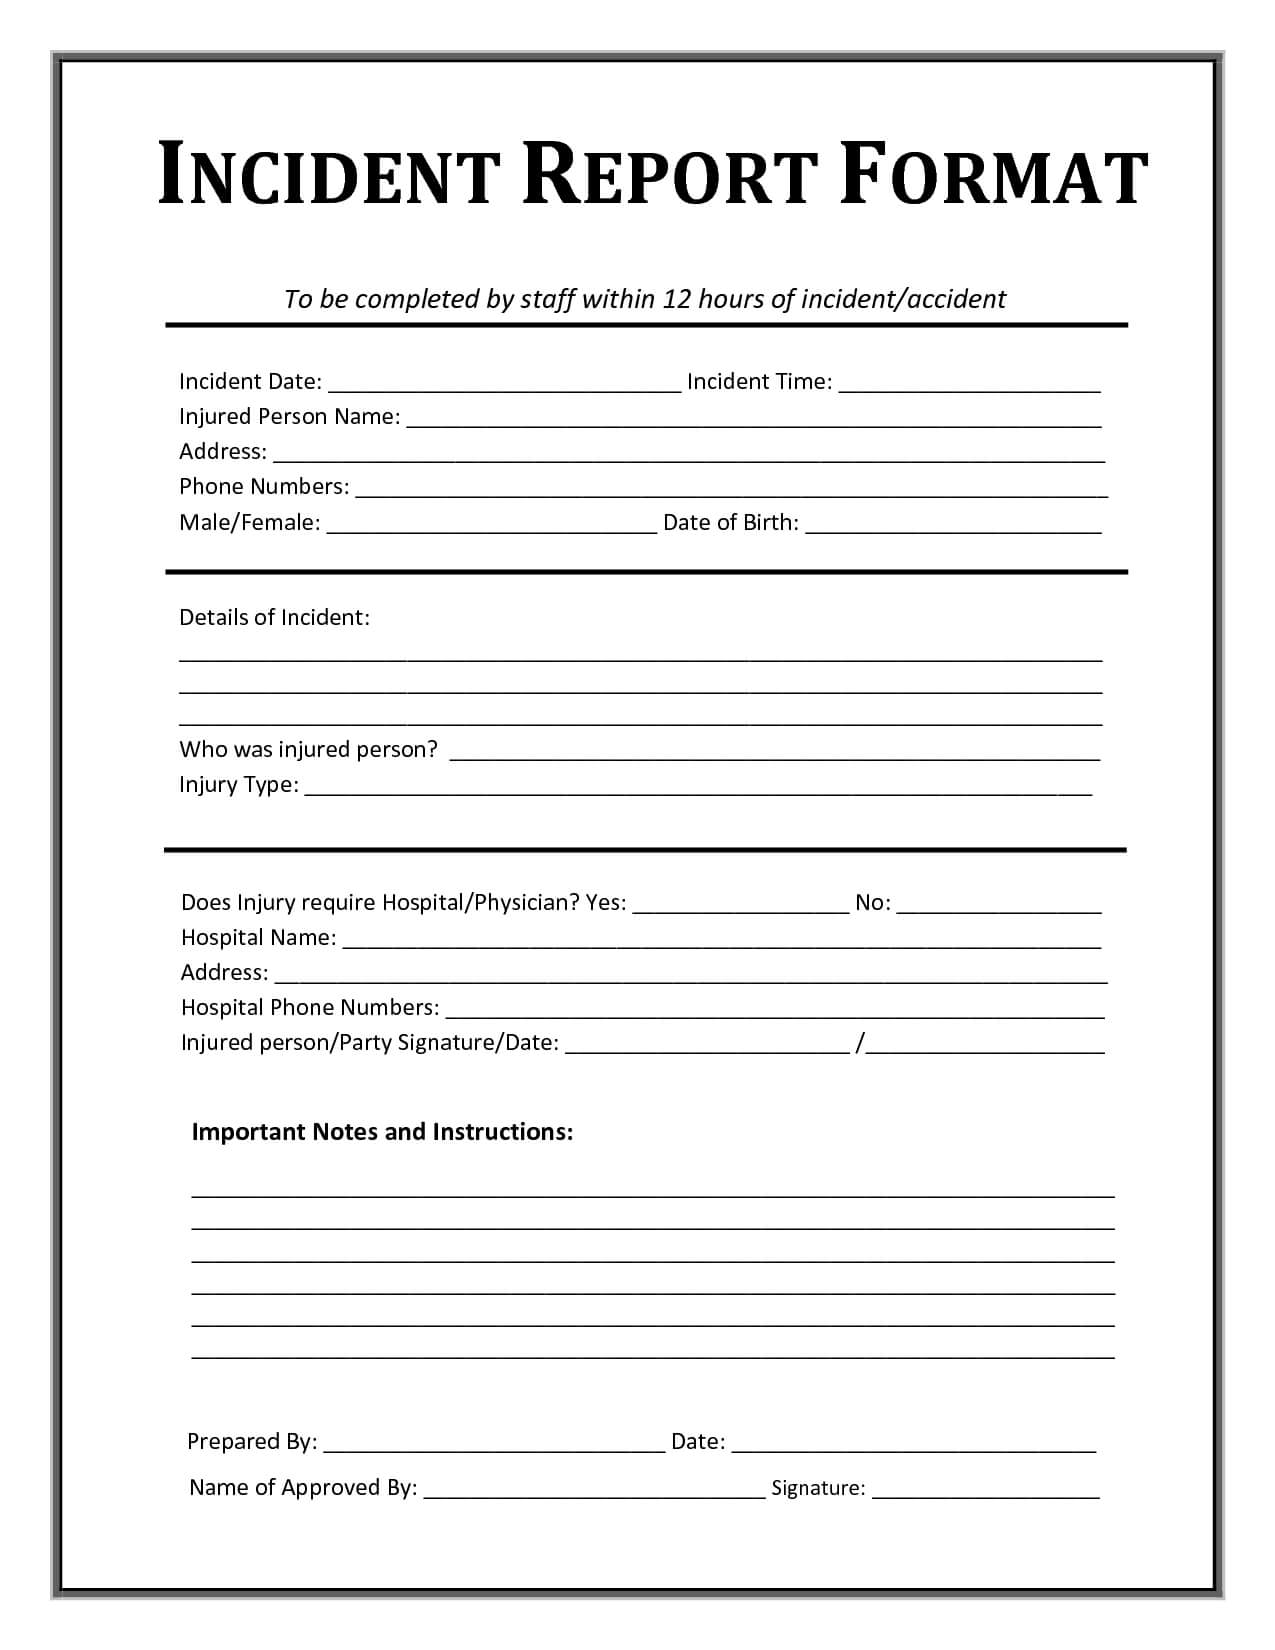 Incident Report Template | Incident Report Form, Incident Inside Incident Report Template Uk